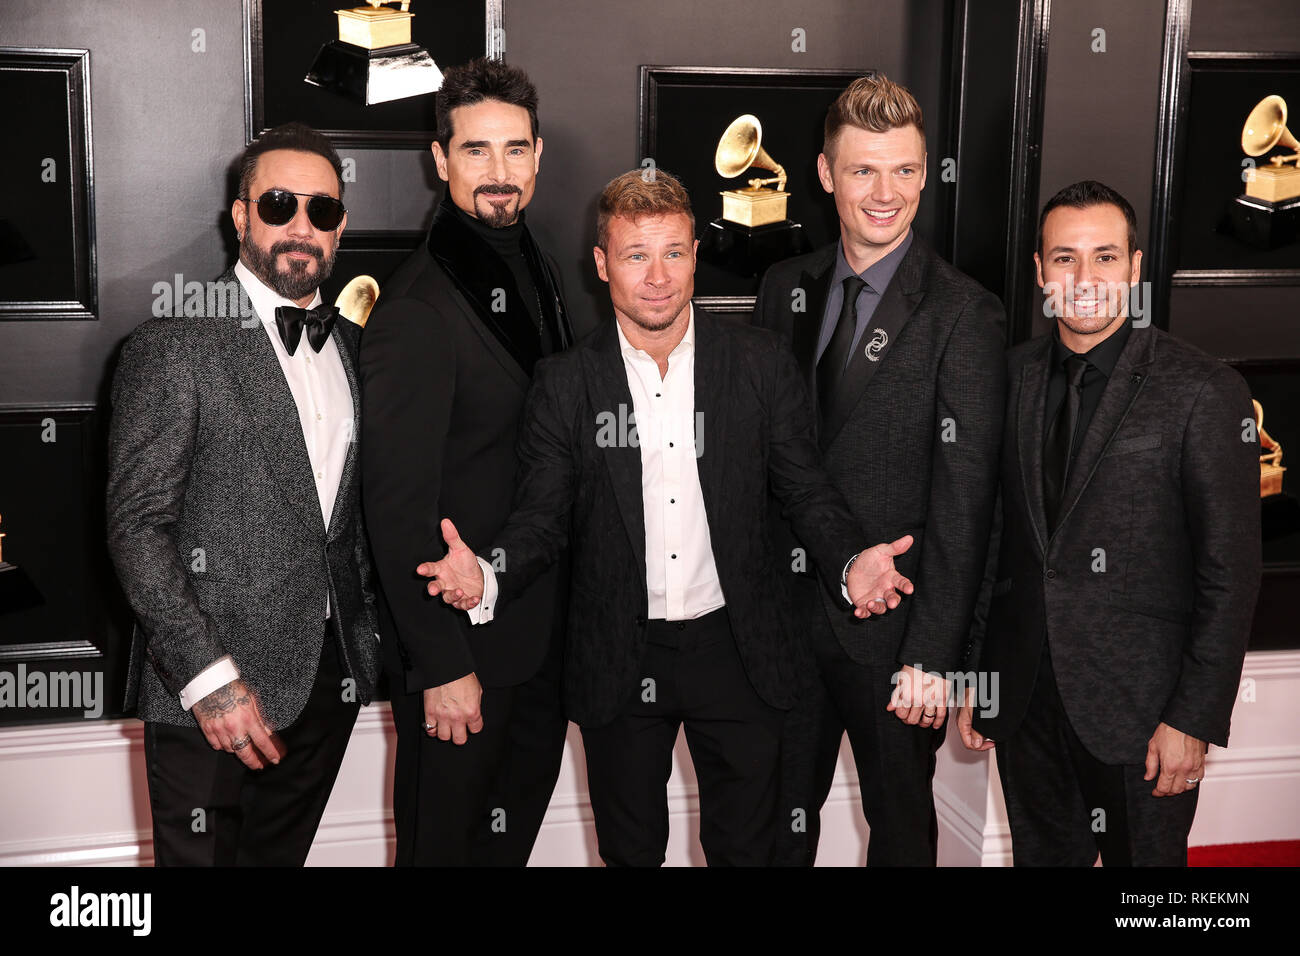 Los Angeles, California, USA. 14th Jan, 2019. February 10, 2019 - Los Angeles, California, U.S. - (L-R) AJ McLean, Kevin Richardson, Brian Littrell, Nick Carter, and Howie Dorough pose upon arrival for The 61st Annual Grammy Awards. Credit: Alexander Seyum/ZUMA Wire/Alamy Live News Stock Photo